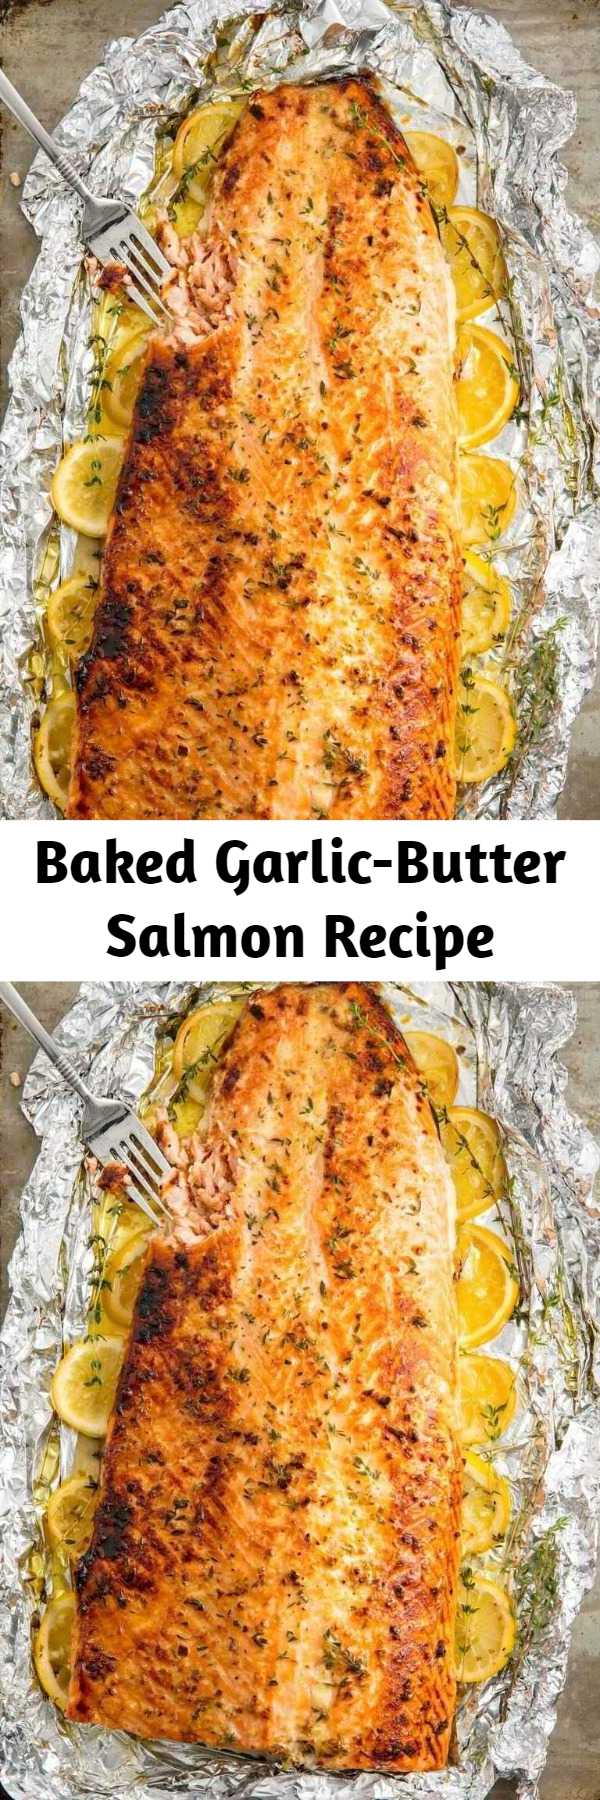 Baked Garlic-Butter Salmon Recipe - This healthy baked salmon is the best way to feed a crowd. There's no skillet cooking at all—everything is oven-baked in foil, making prep and cleanup a breeze. Considering how beautiful, easy, and dang delicious this hunk of fish is, we believe it might just be the best baked salmon recipe IN THE WORLD. This is the only baked salmon recipe you'll ever need. #fish #fishrecipes #salmon #salmonrecipes #easyrecipes #healthyrecipes